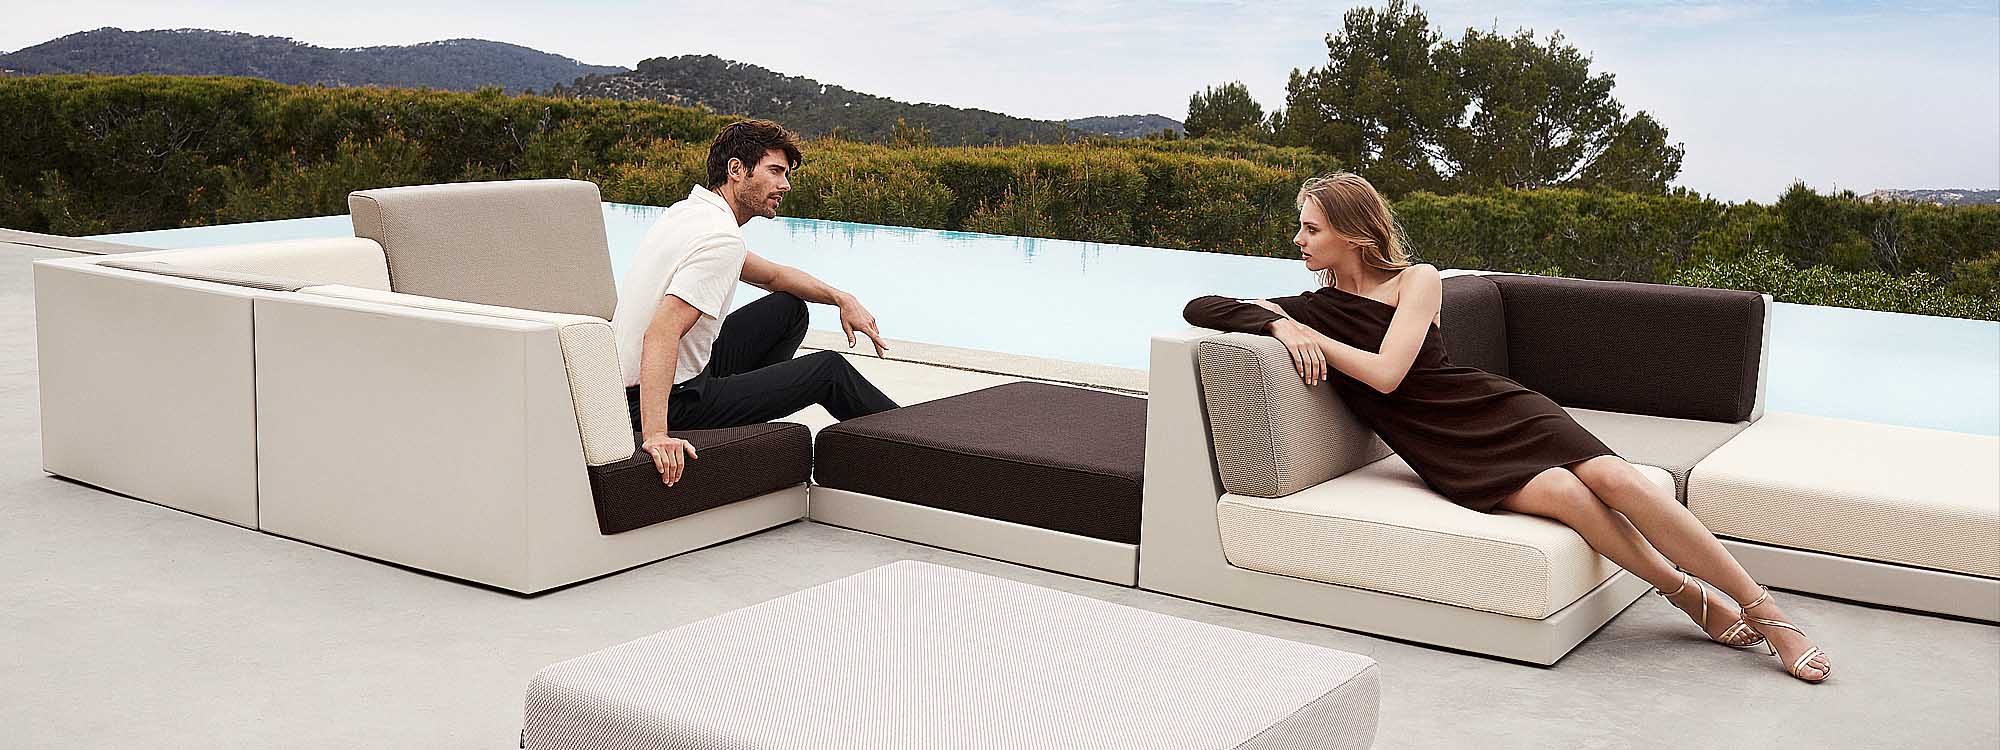 Image of man and woman sat in opposing directions turned talking to one another on Vondom minimalist garden sofa